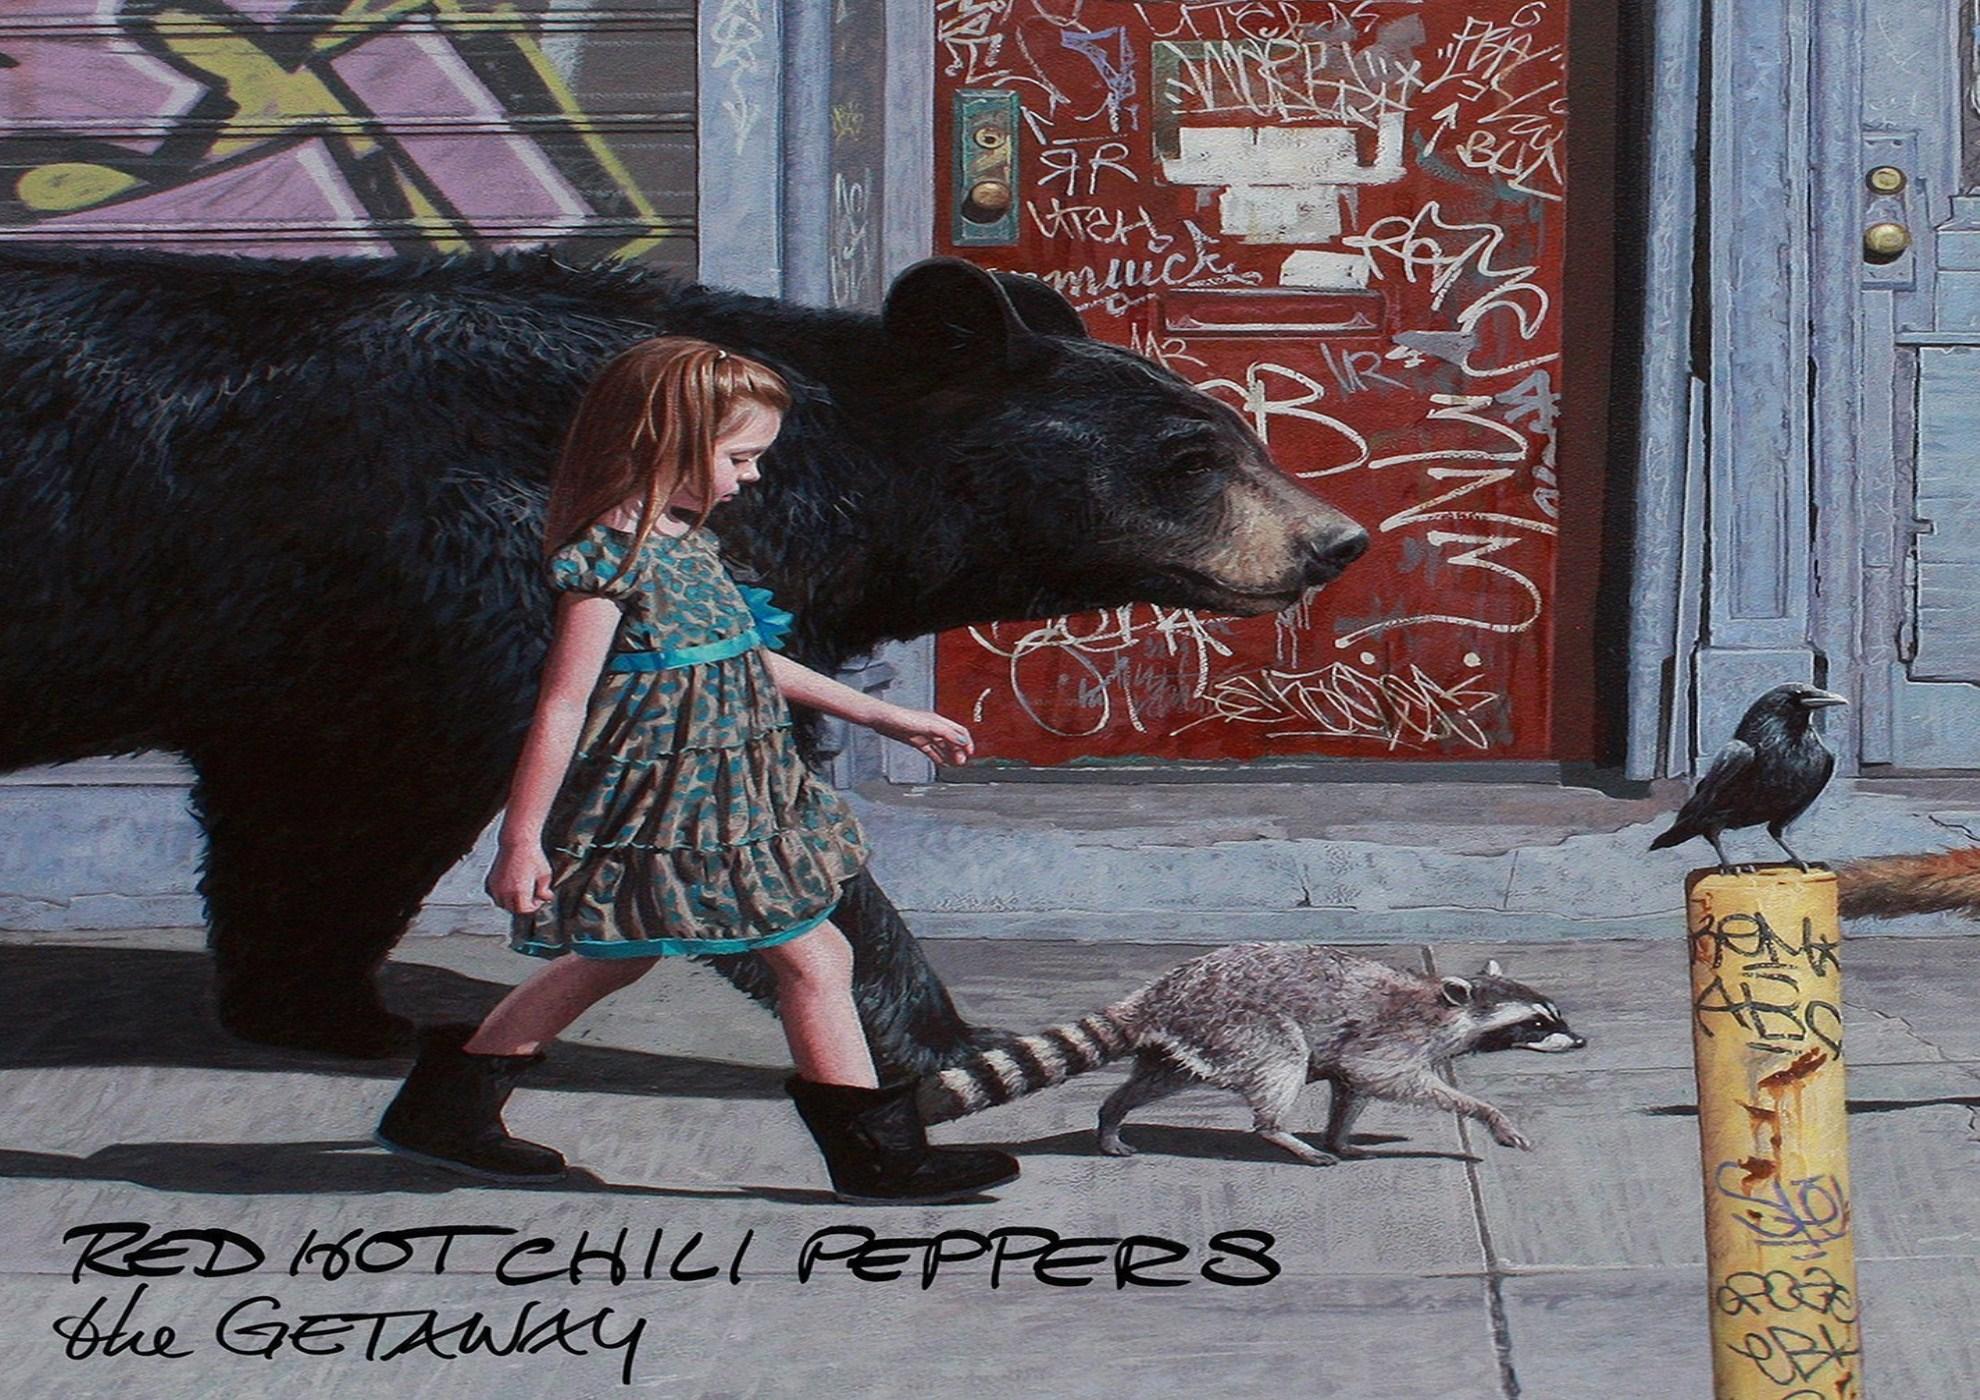 Red hot chili peppers dark. Red hot Chili Peppers the Getaway 2016. The Getaway альбом Red hot Chili Peppers. Red hot Chili Peppers - the Getaway - 2016 - LP. The Getaway Red hot Chili Peppers обложка.